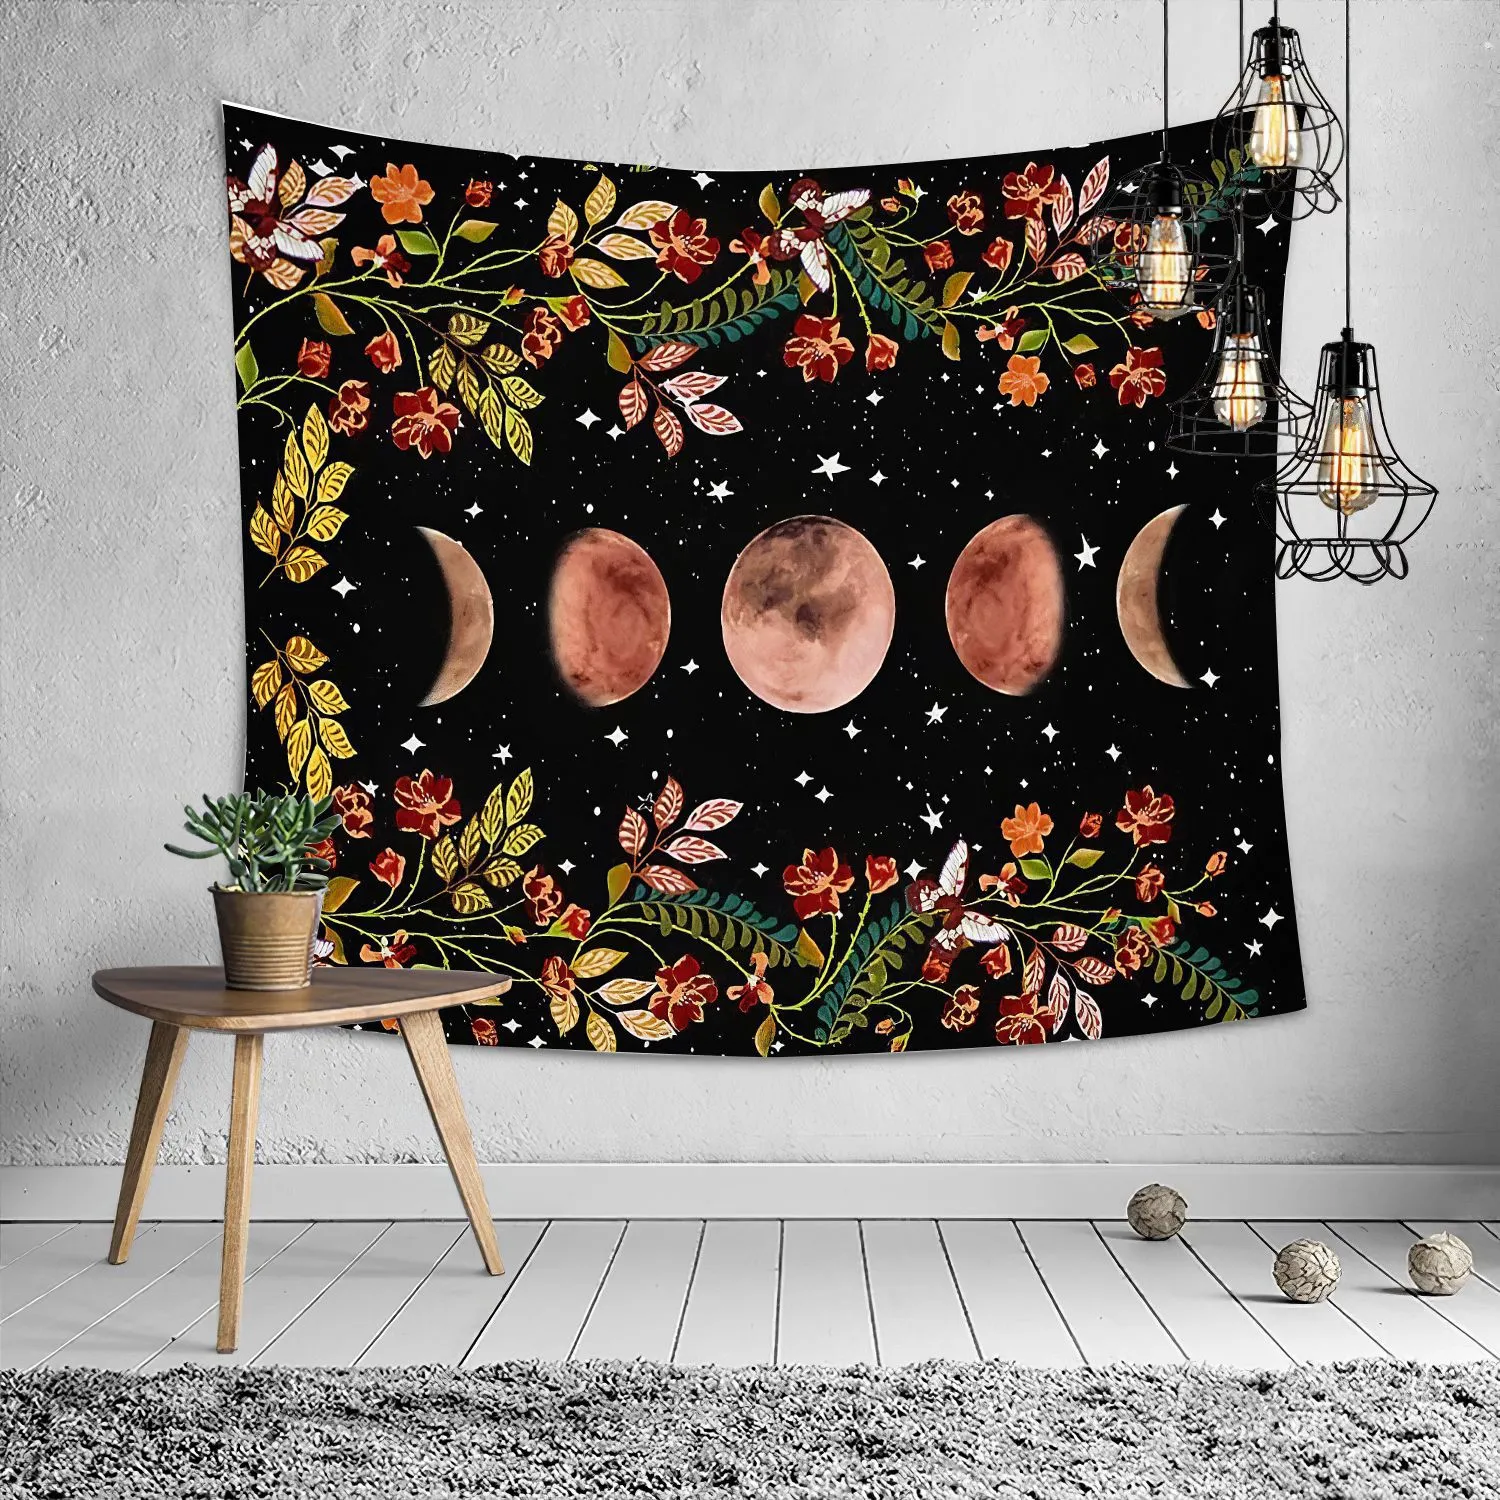 Astrology Tarot Tapestry Home Room Wall Decoration Witchcraft Mandala Ecor Decoration Hippie Hanging Blanket